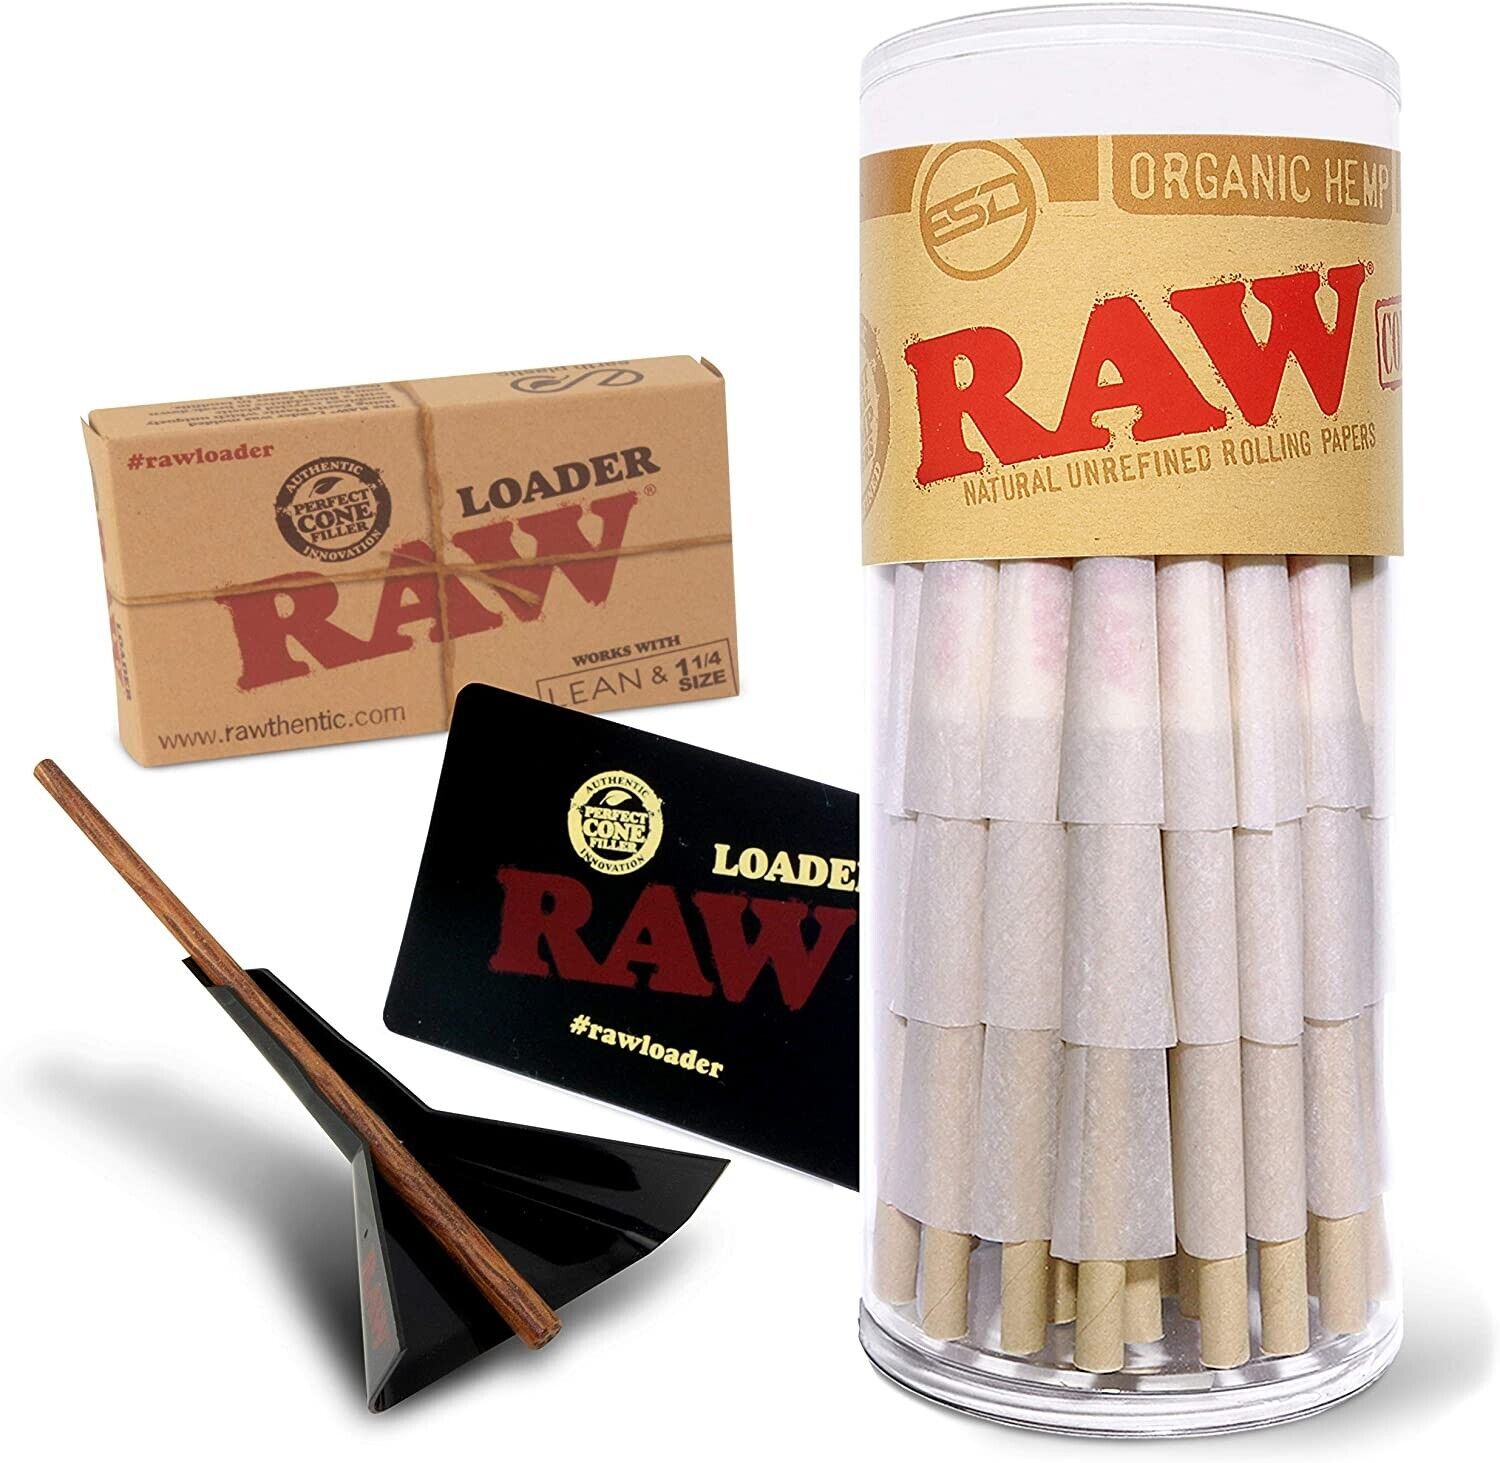 RAW 1 1/4 Cone Loader Bundle with 50 Organic 1-1/4 Size Pre Rolled Cones